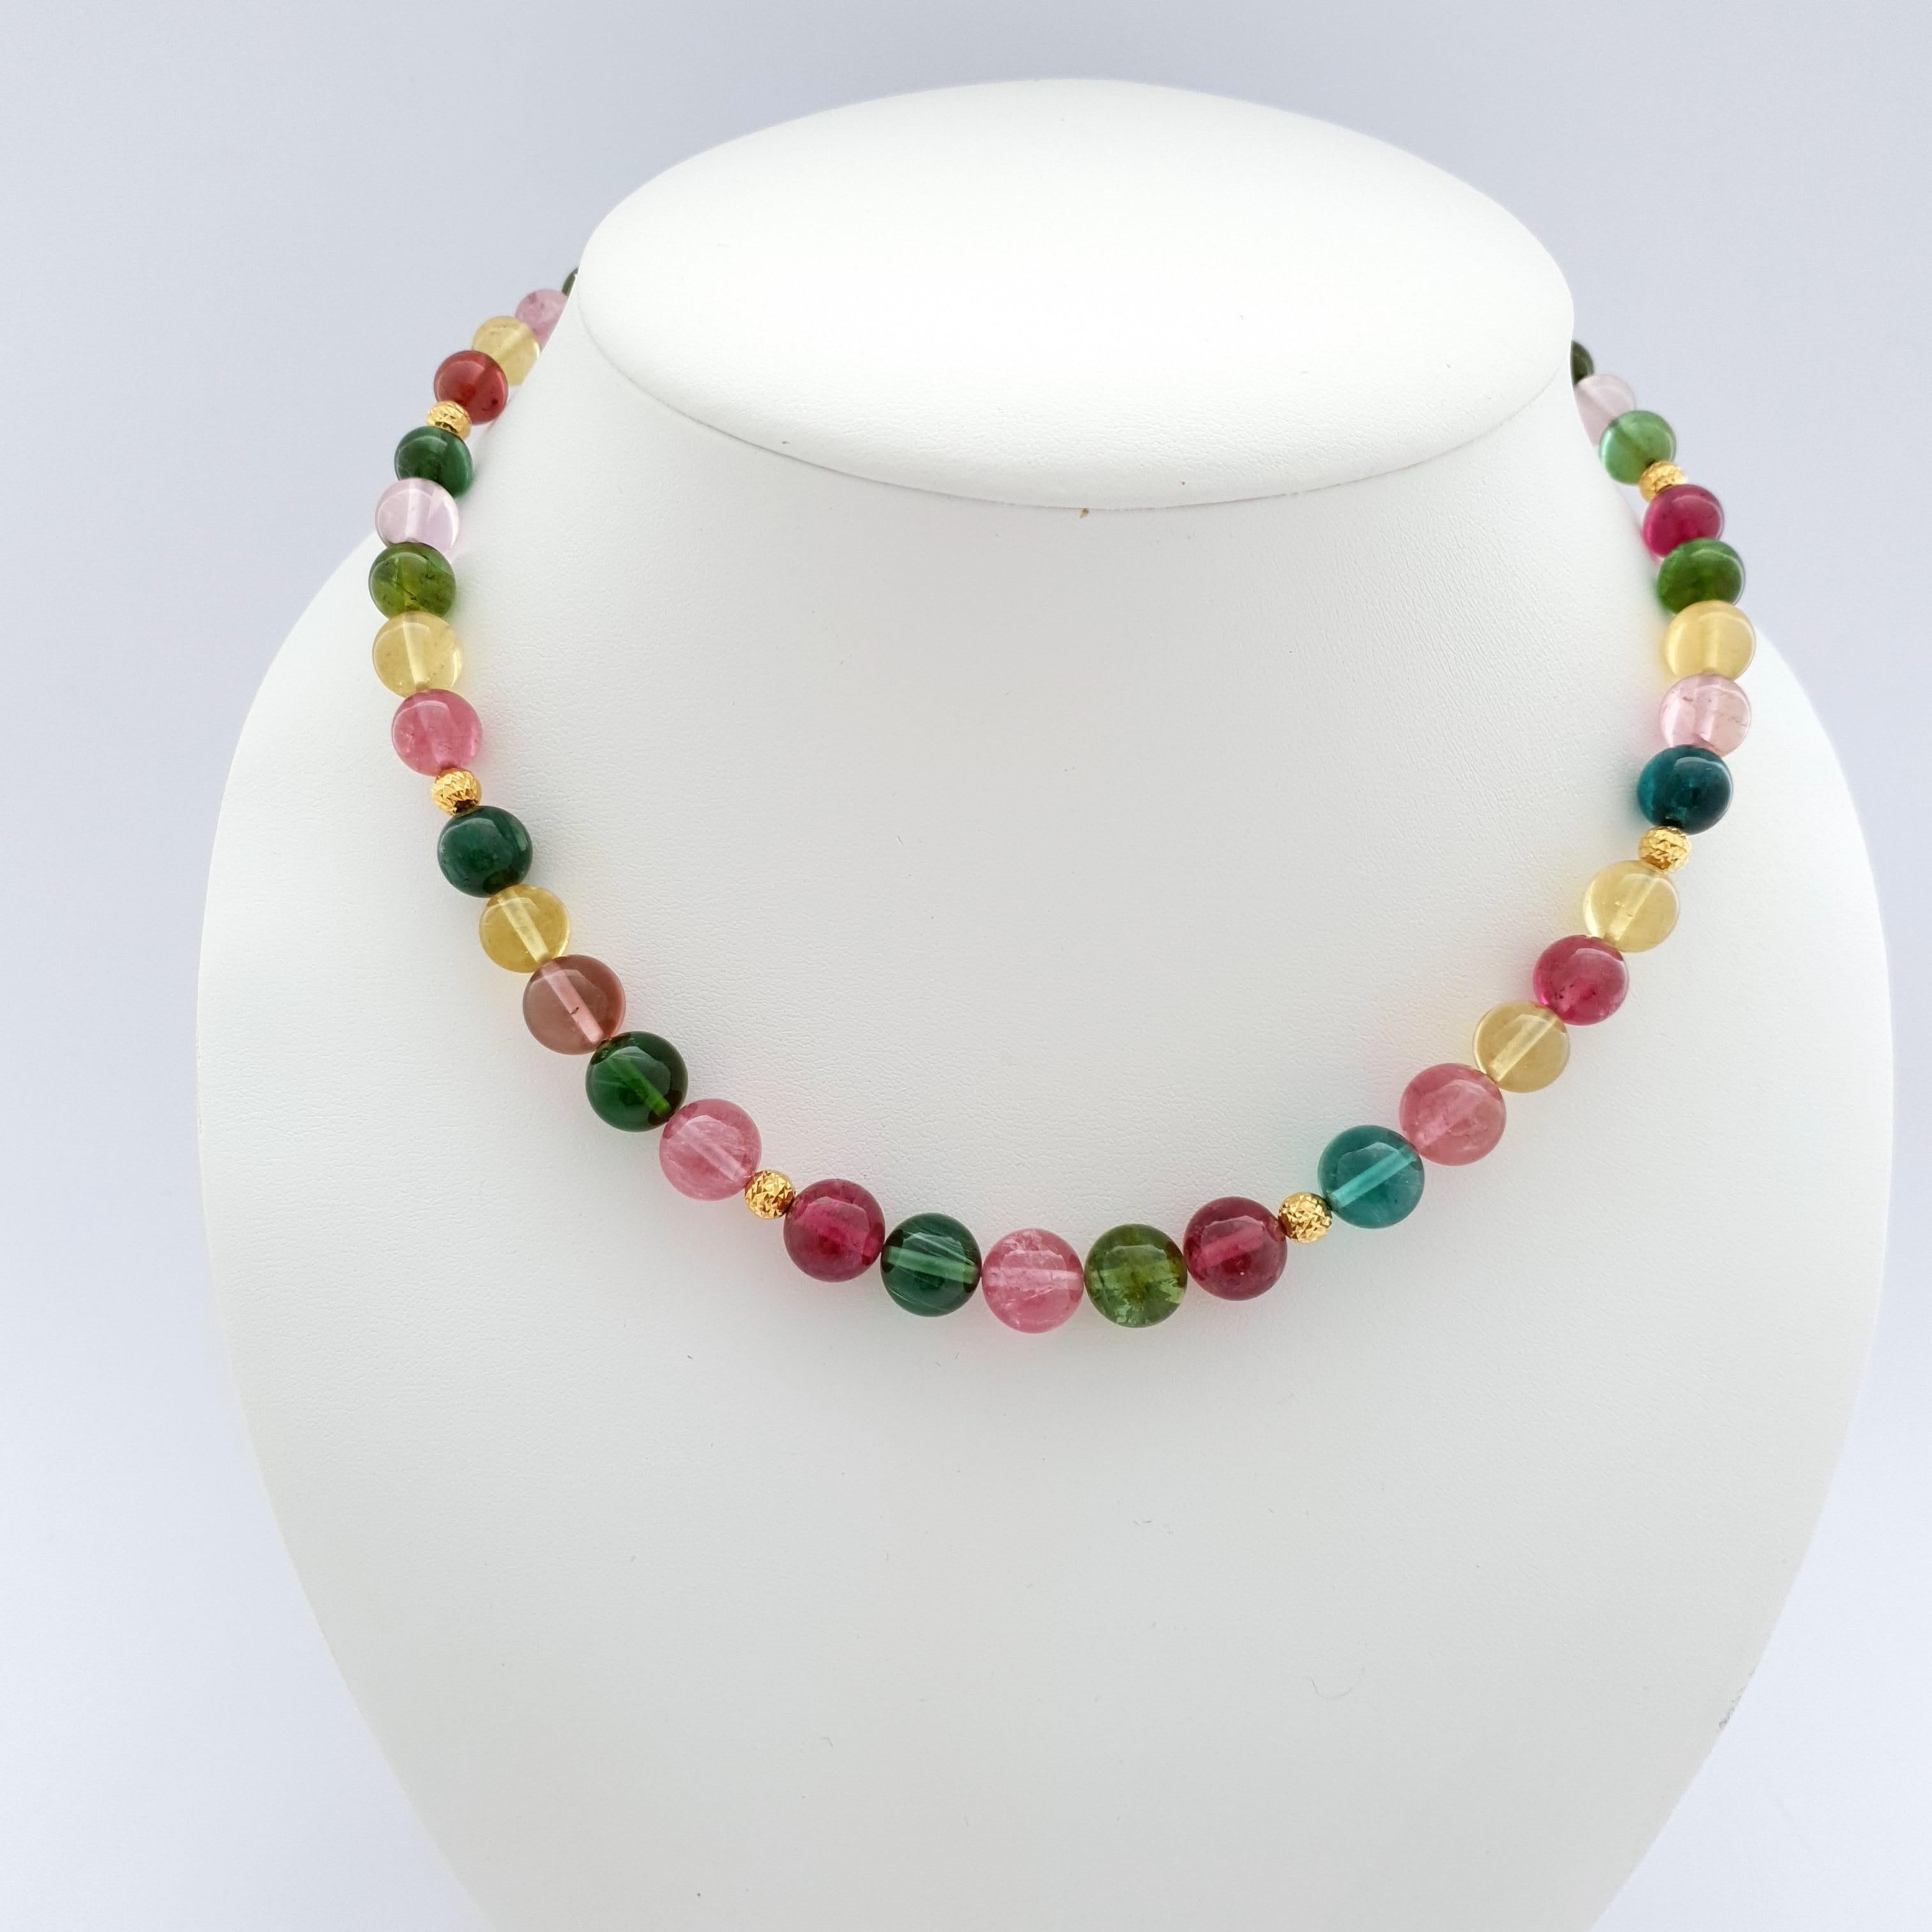 This Natural Multicolour Tourmaline Round Beaded Necklace with 18 Carat Yellow Gold is handmade in German quality.
The screw clasp is easy to handle and very secure. The colorful tourmalines go very well with different outfits.
Timeless and classic